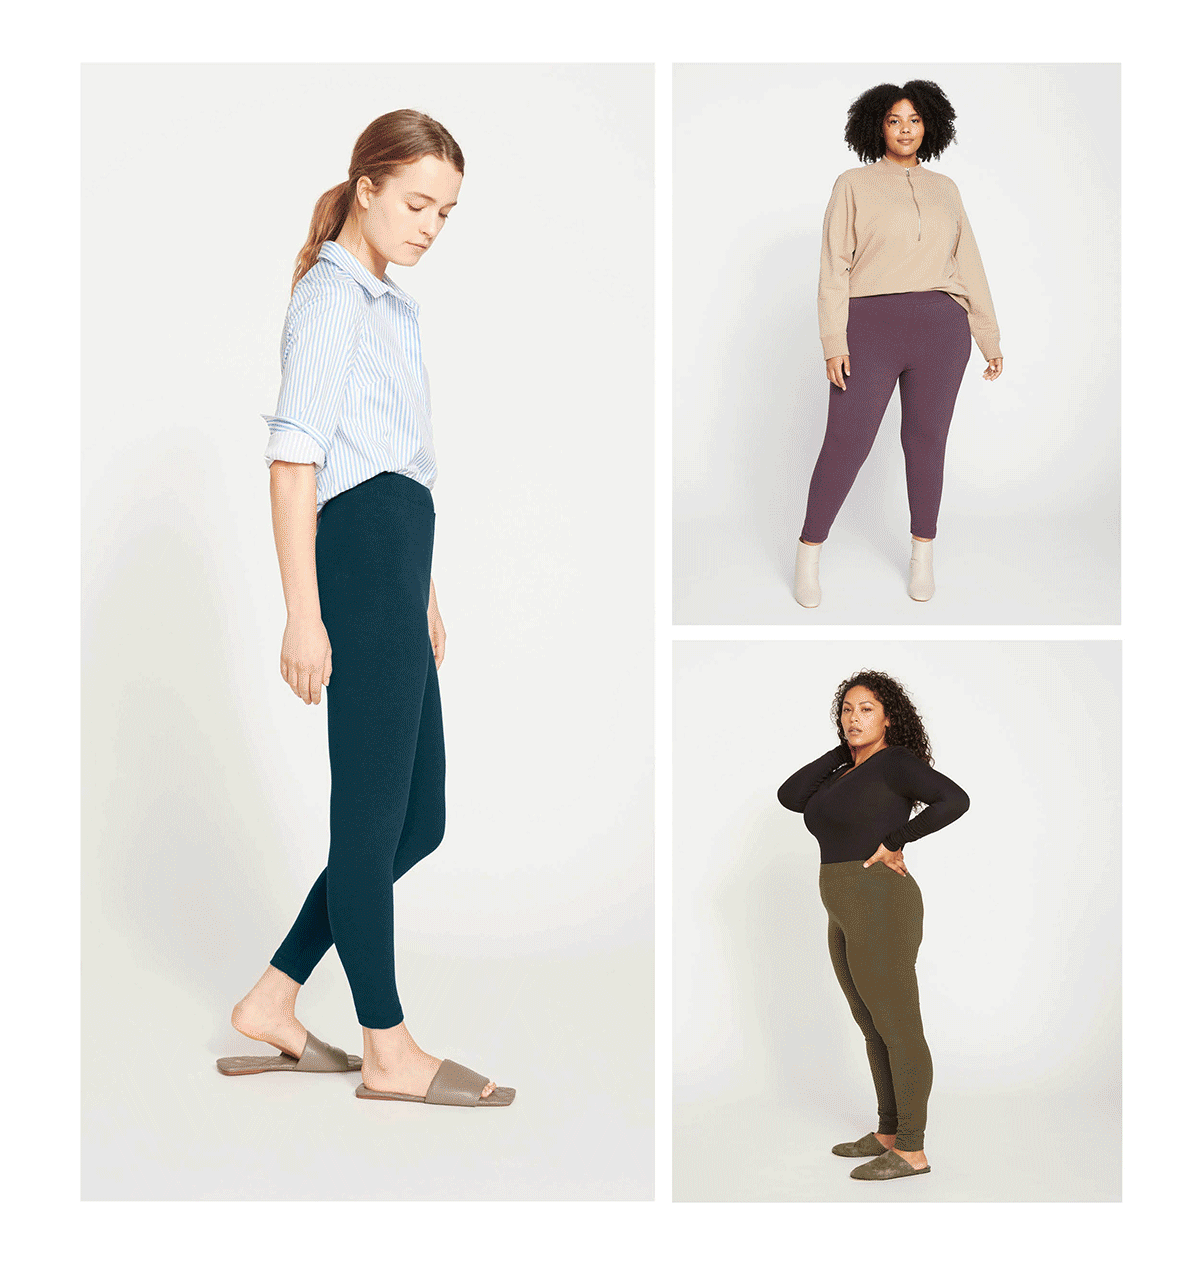 The Roya legging comes in so many colors